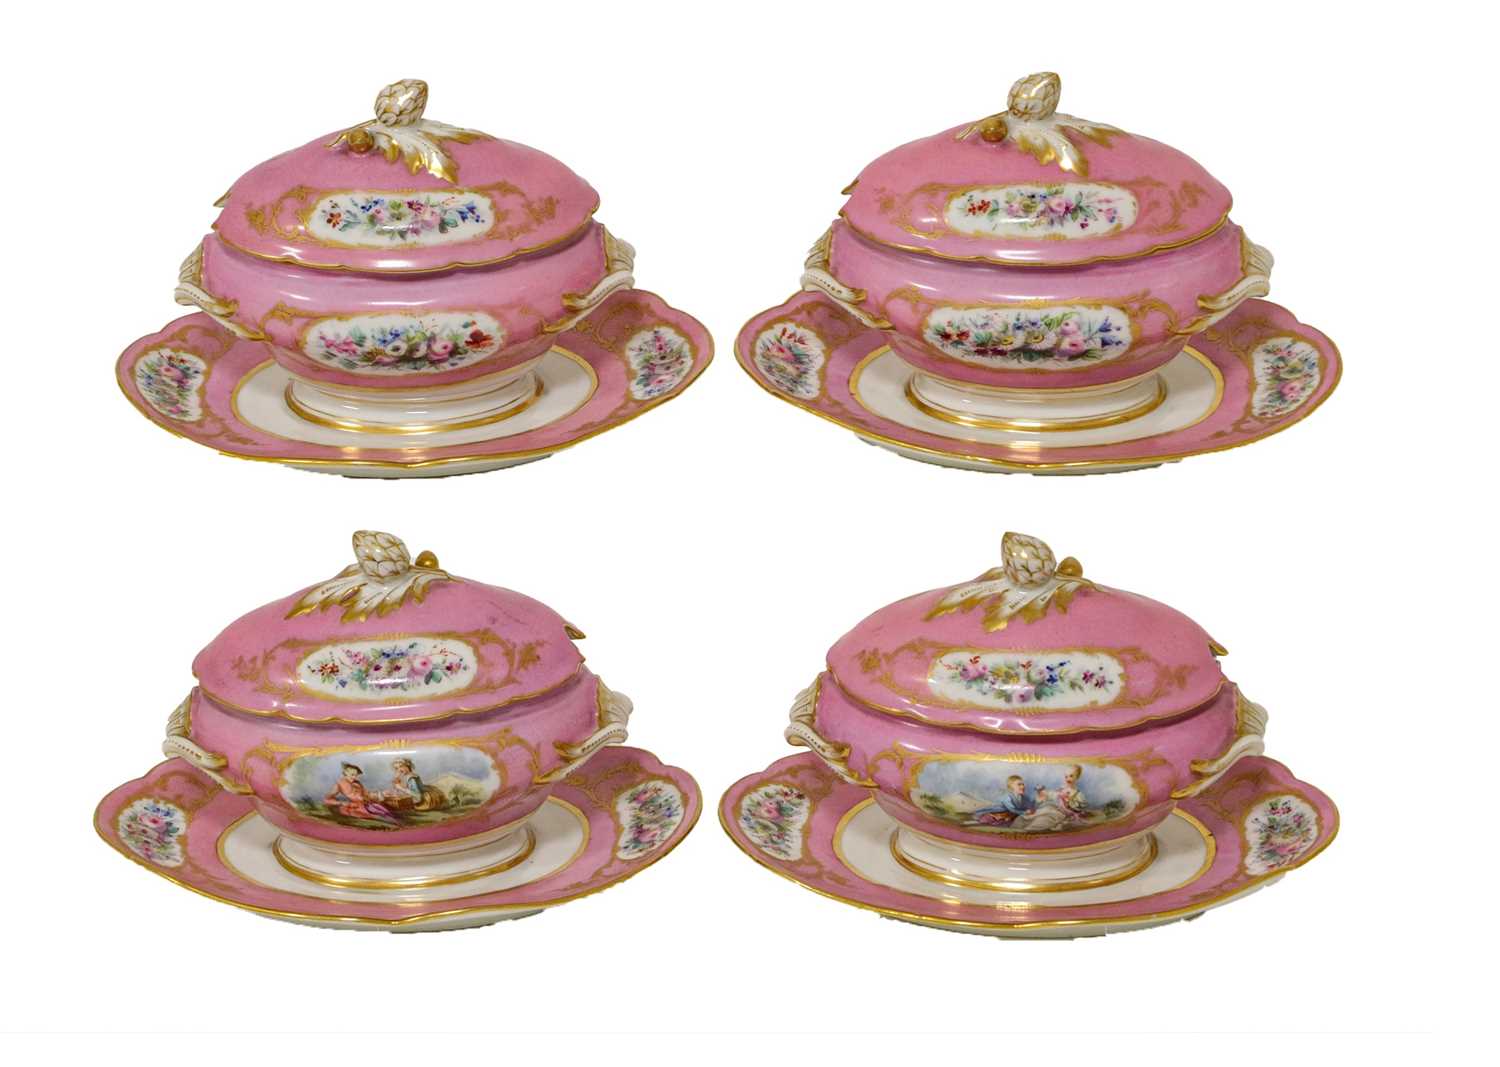 A Sevres-Style Porcelain Dessert Service, late 19th century, painted with Watteauesque figures in - Image 4 of 12